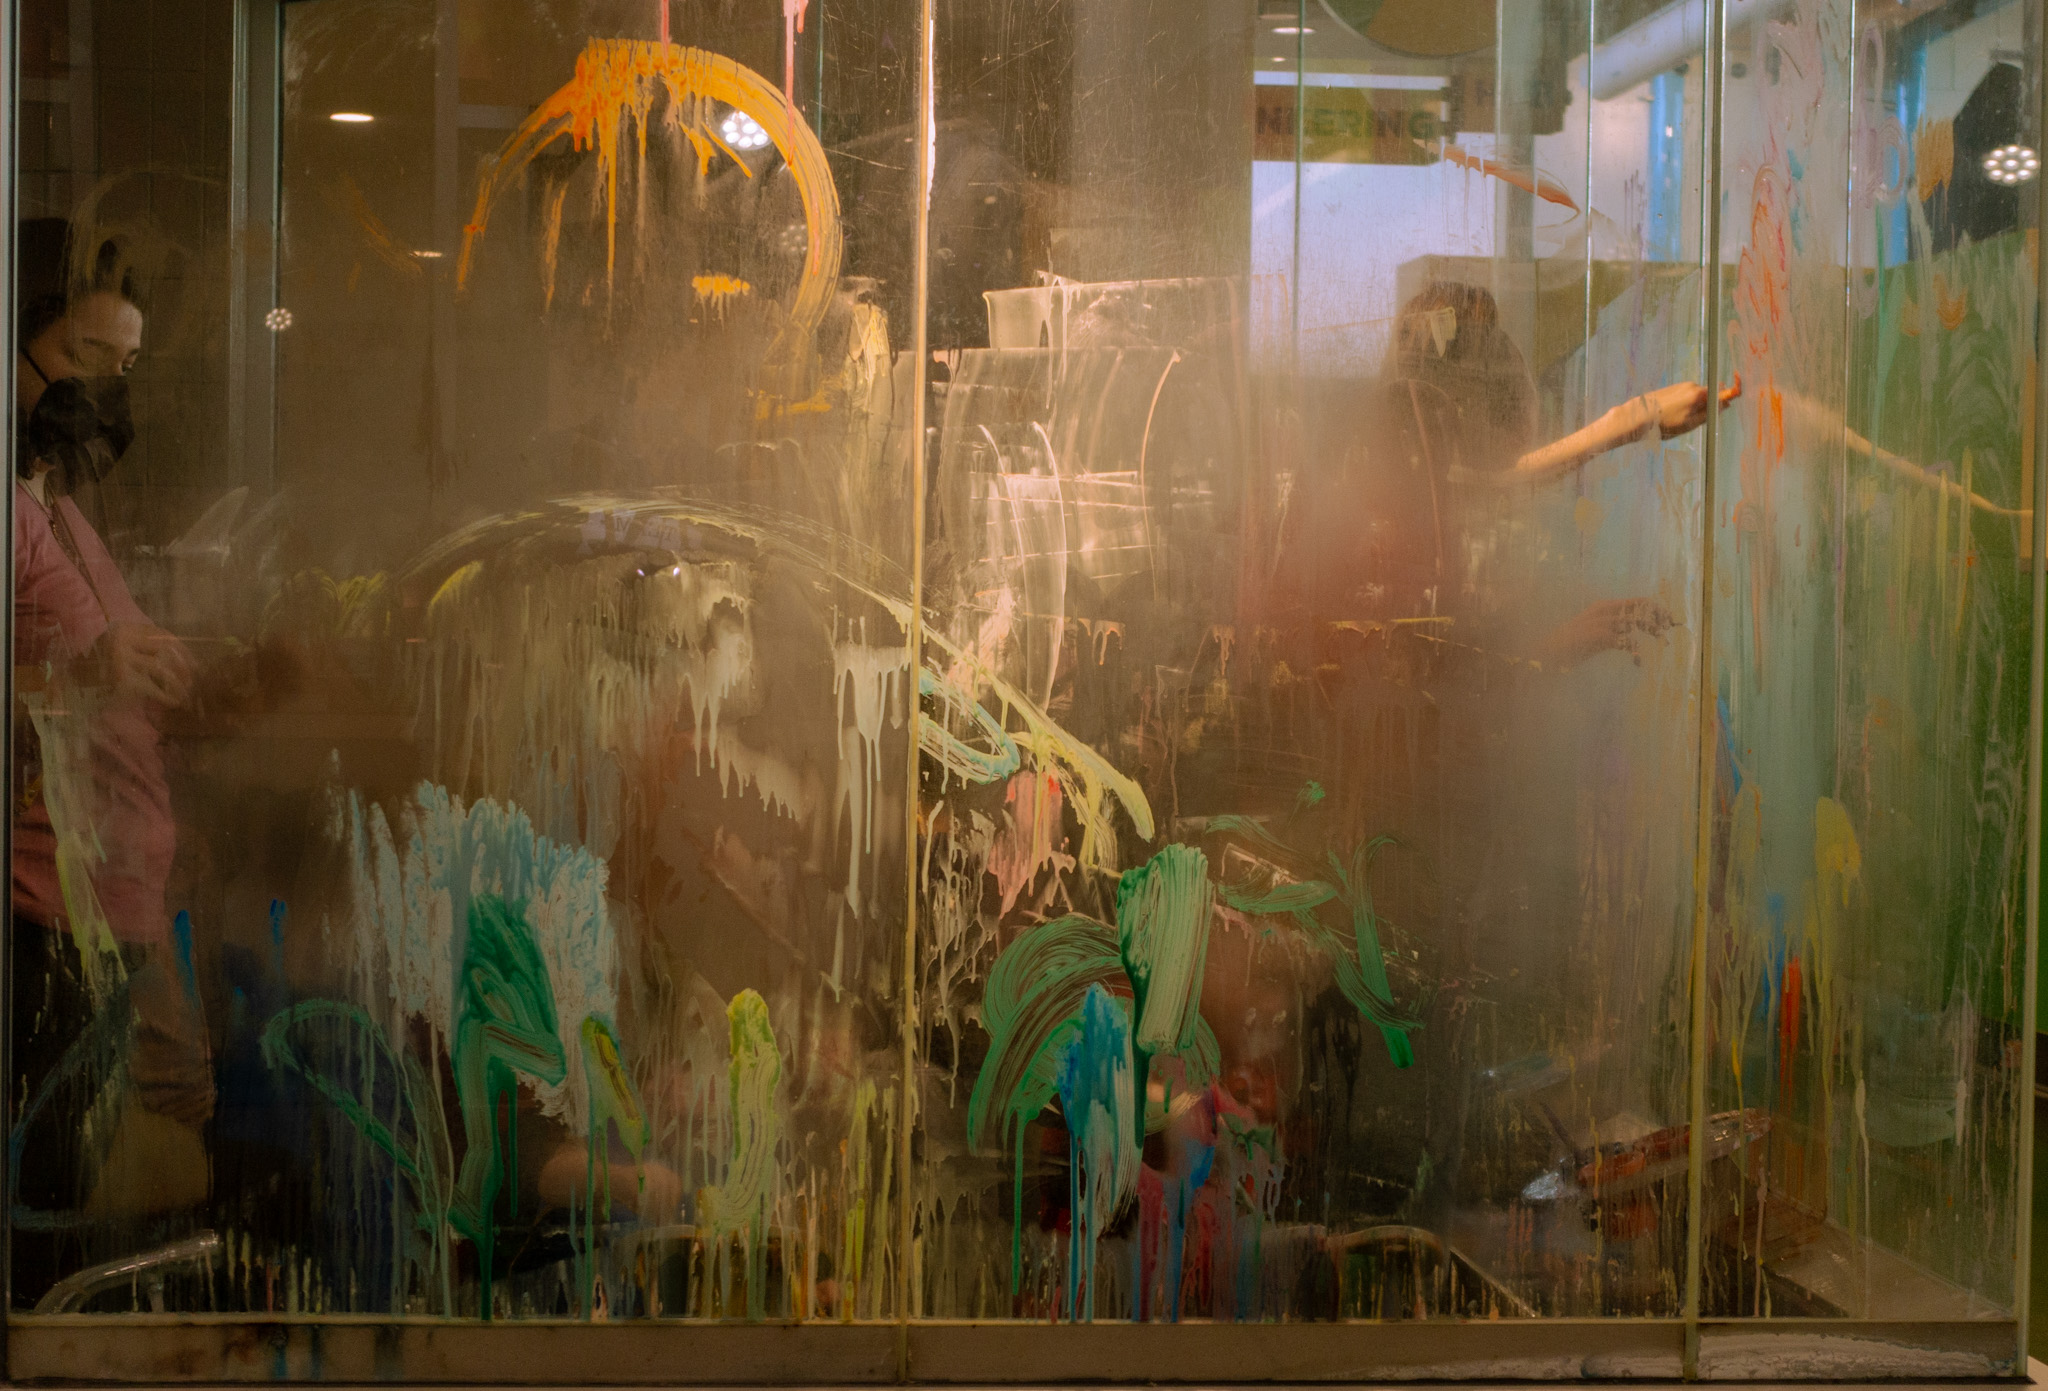 Color photograph of parents and children painting on fiberglass wall at Scott family amazeum in Bentonville, Arkansas